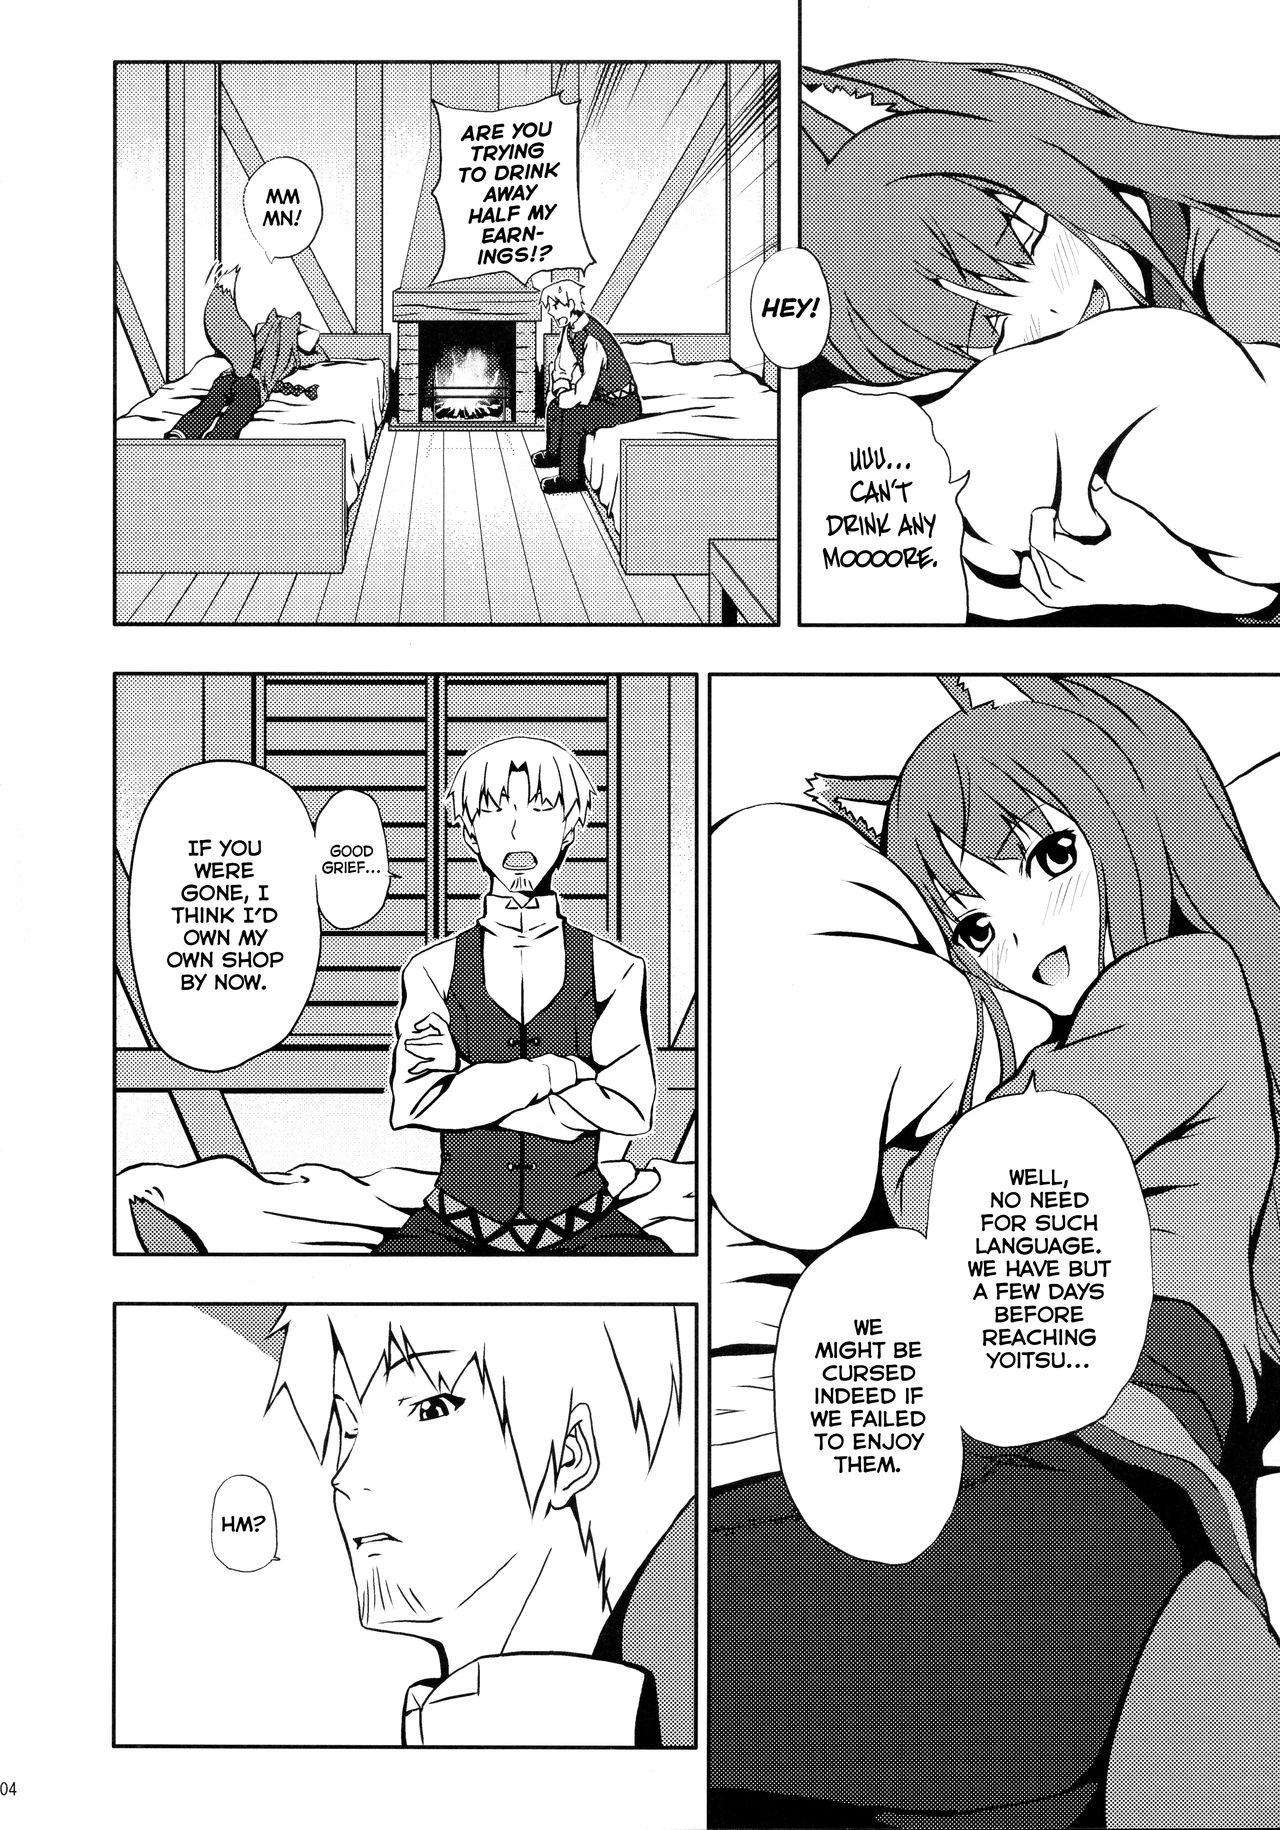 Body Massage Bitter Apple - Spice and wolf Linda - Page 4